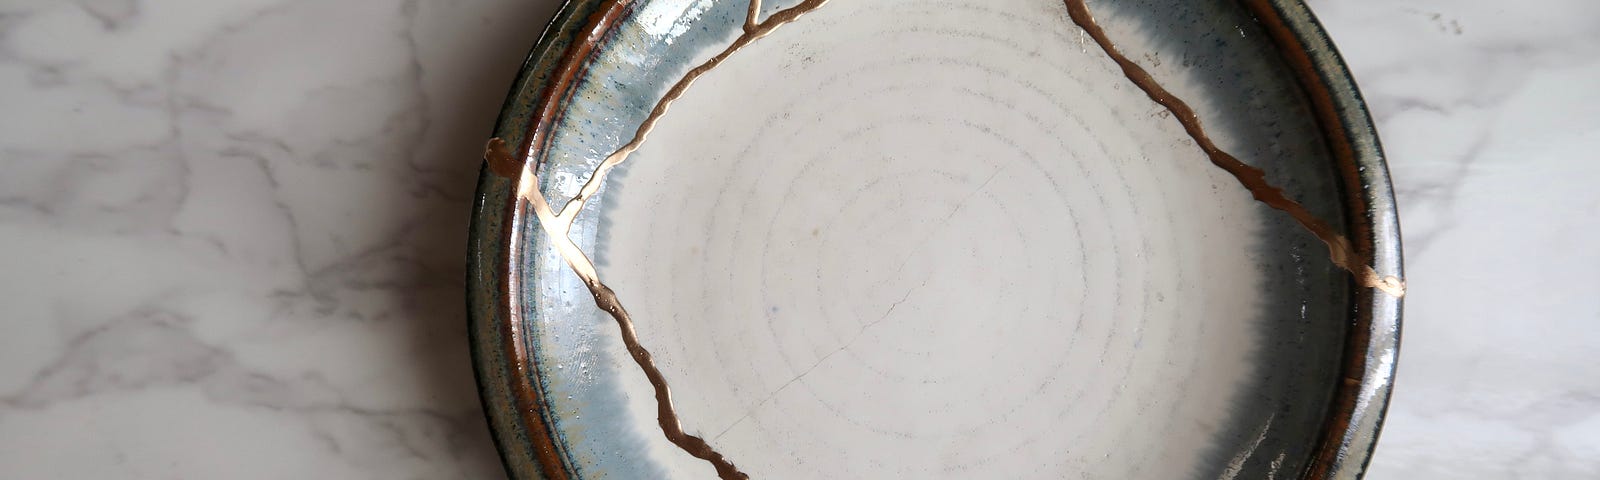 A white and grey bowl repaired together with gold streaks across the surface